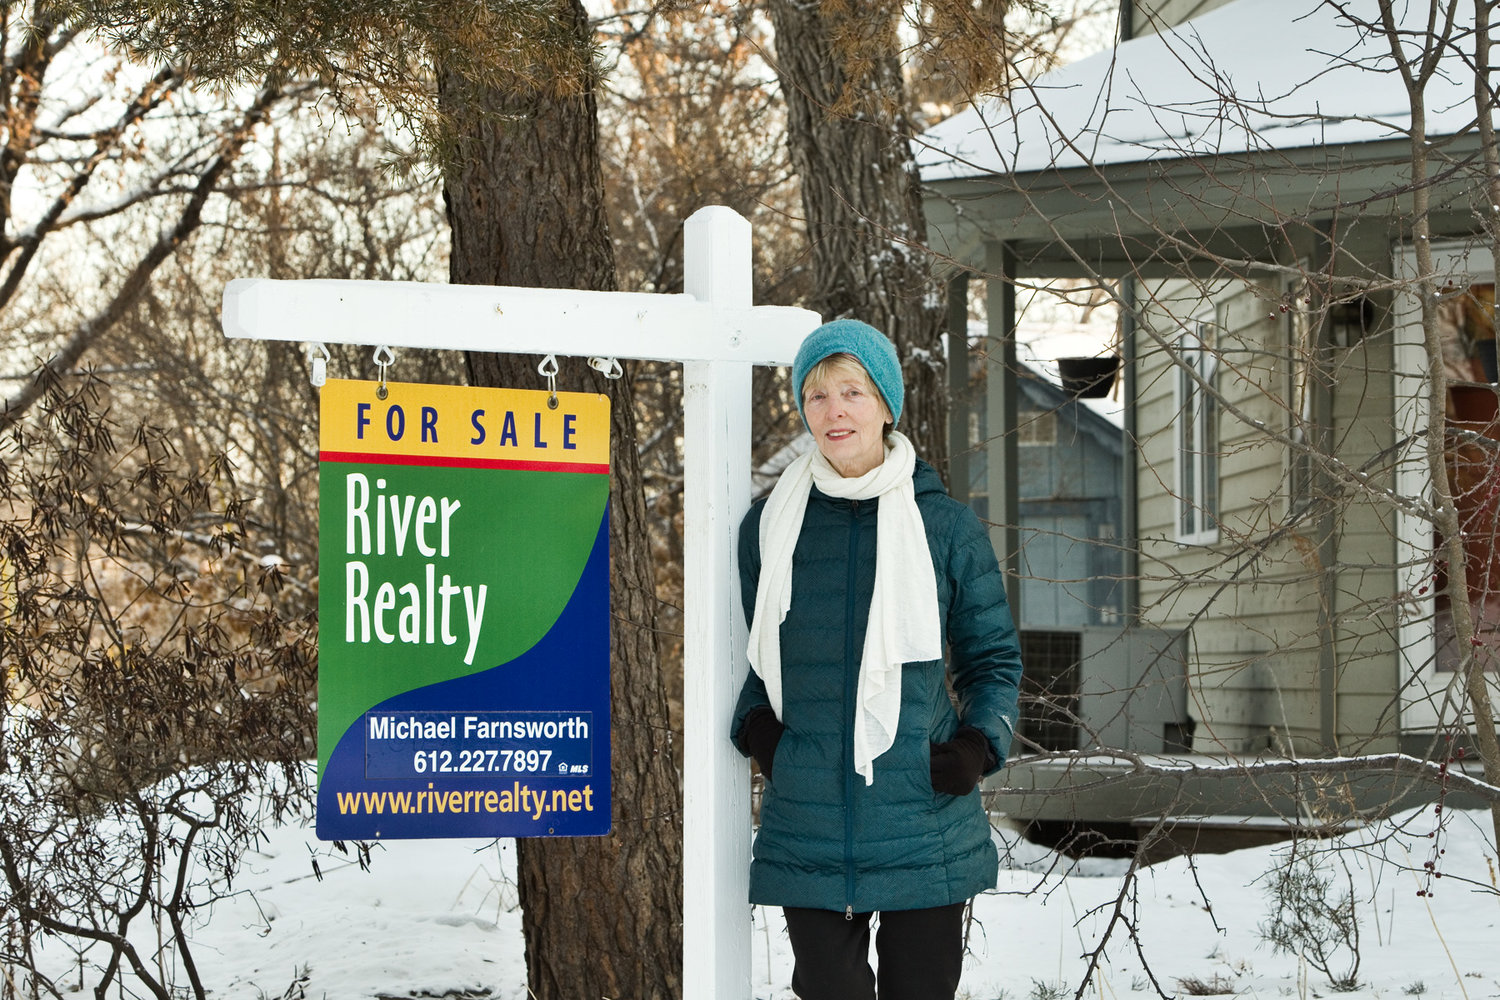 Real estate broker and business owner Pat Rosaves pointed out that homes are selling rapidly, even fixer-uppers. Houses are selling within four days on the market wiith multiple offers. (Photo by Margie O’Loughlin)